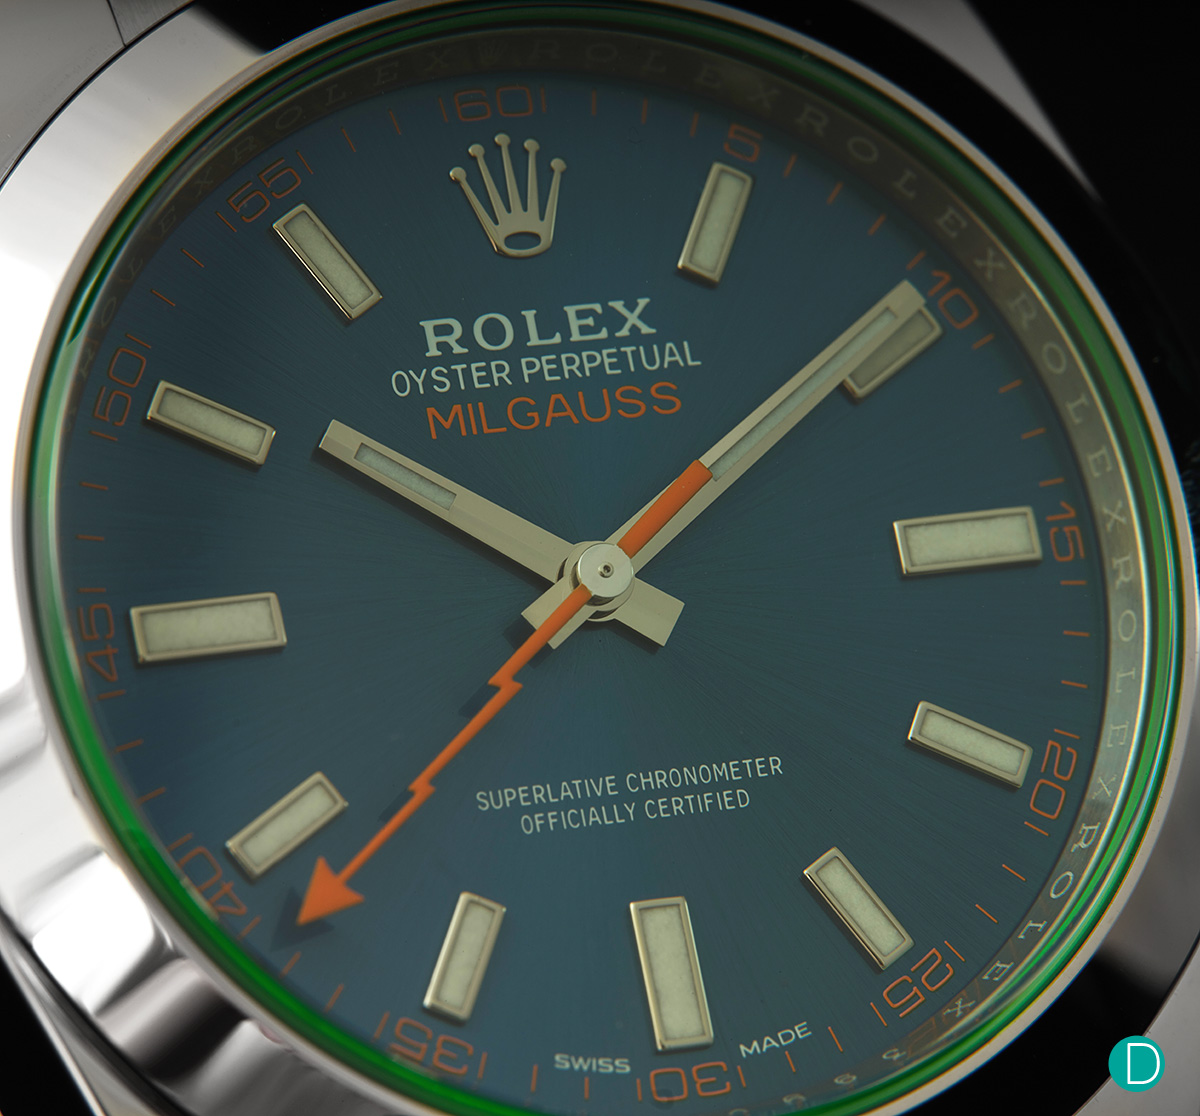 Review: Hands-on with the Rolex Milgauss Ref. 116400GV